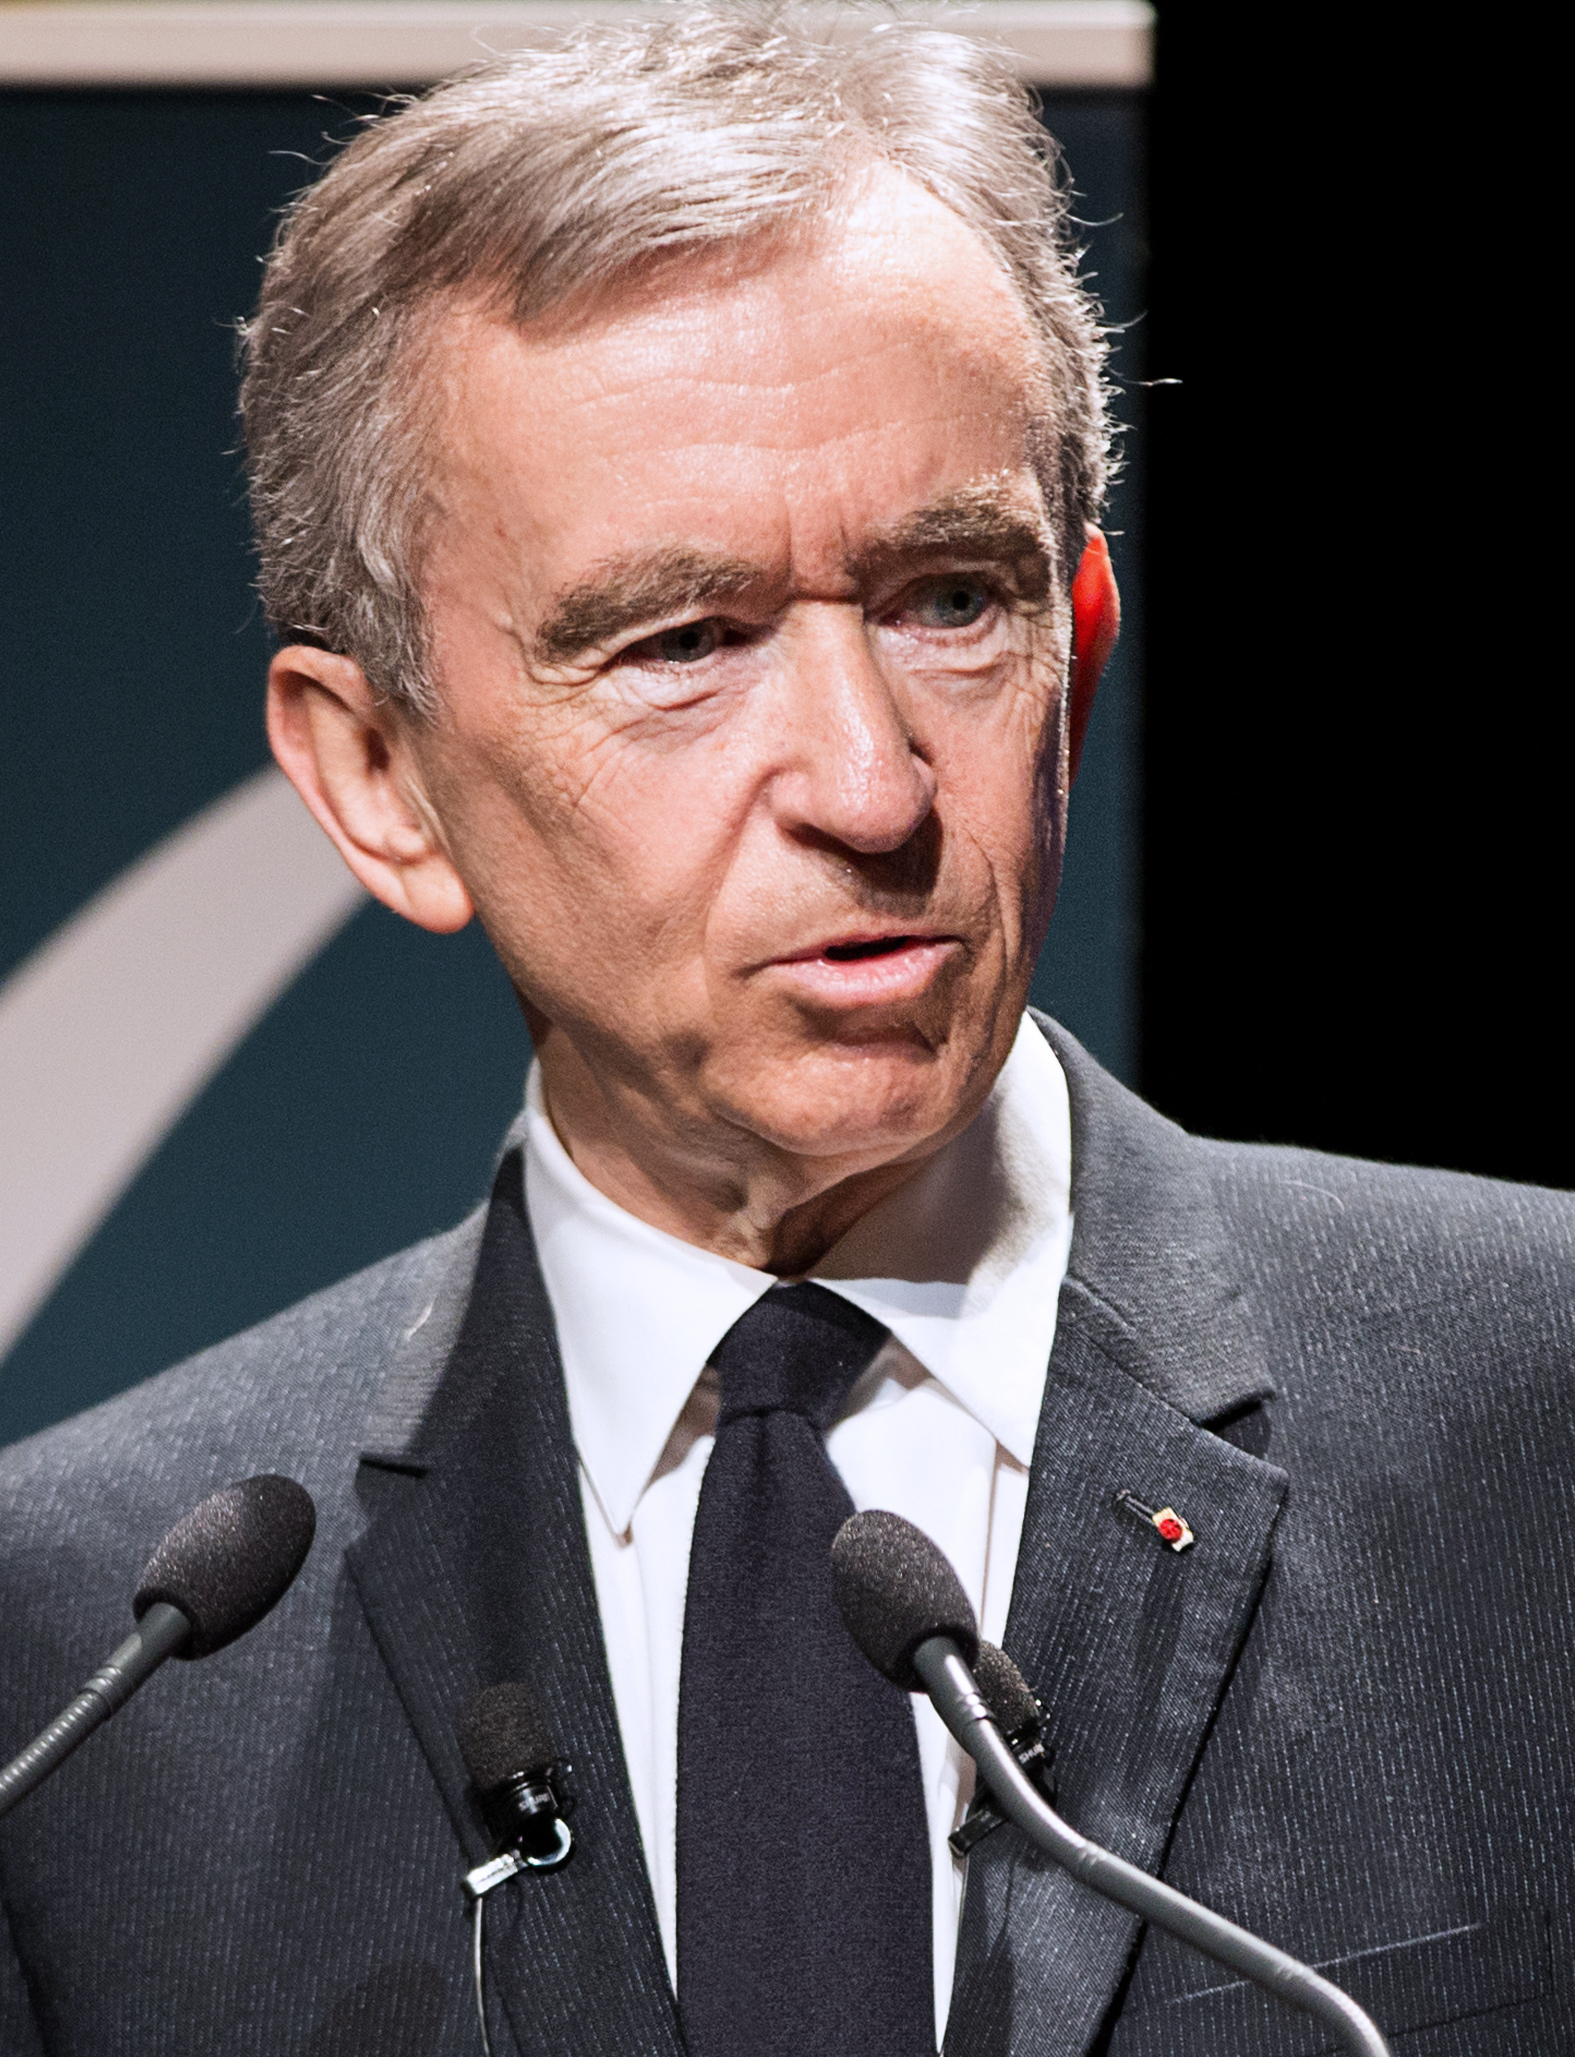 30 Interesting Facts You Probably Didn’t Know About Bernard Arnault ...